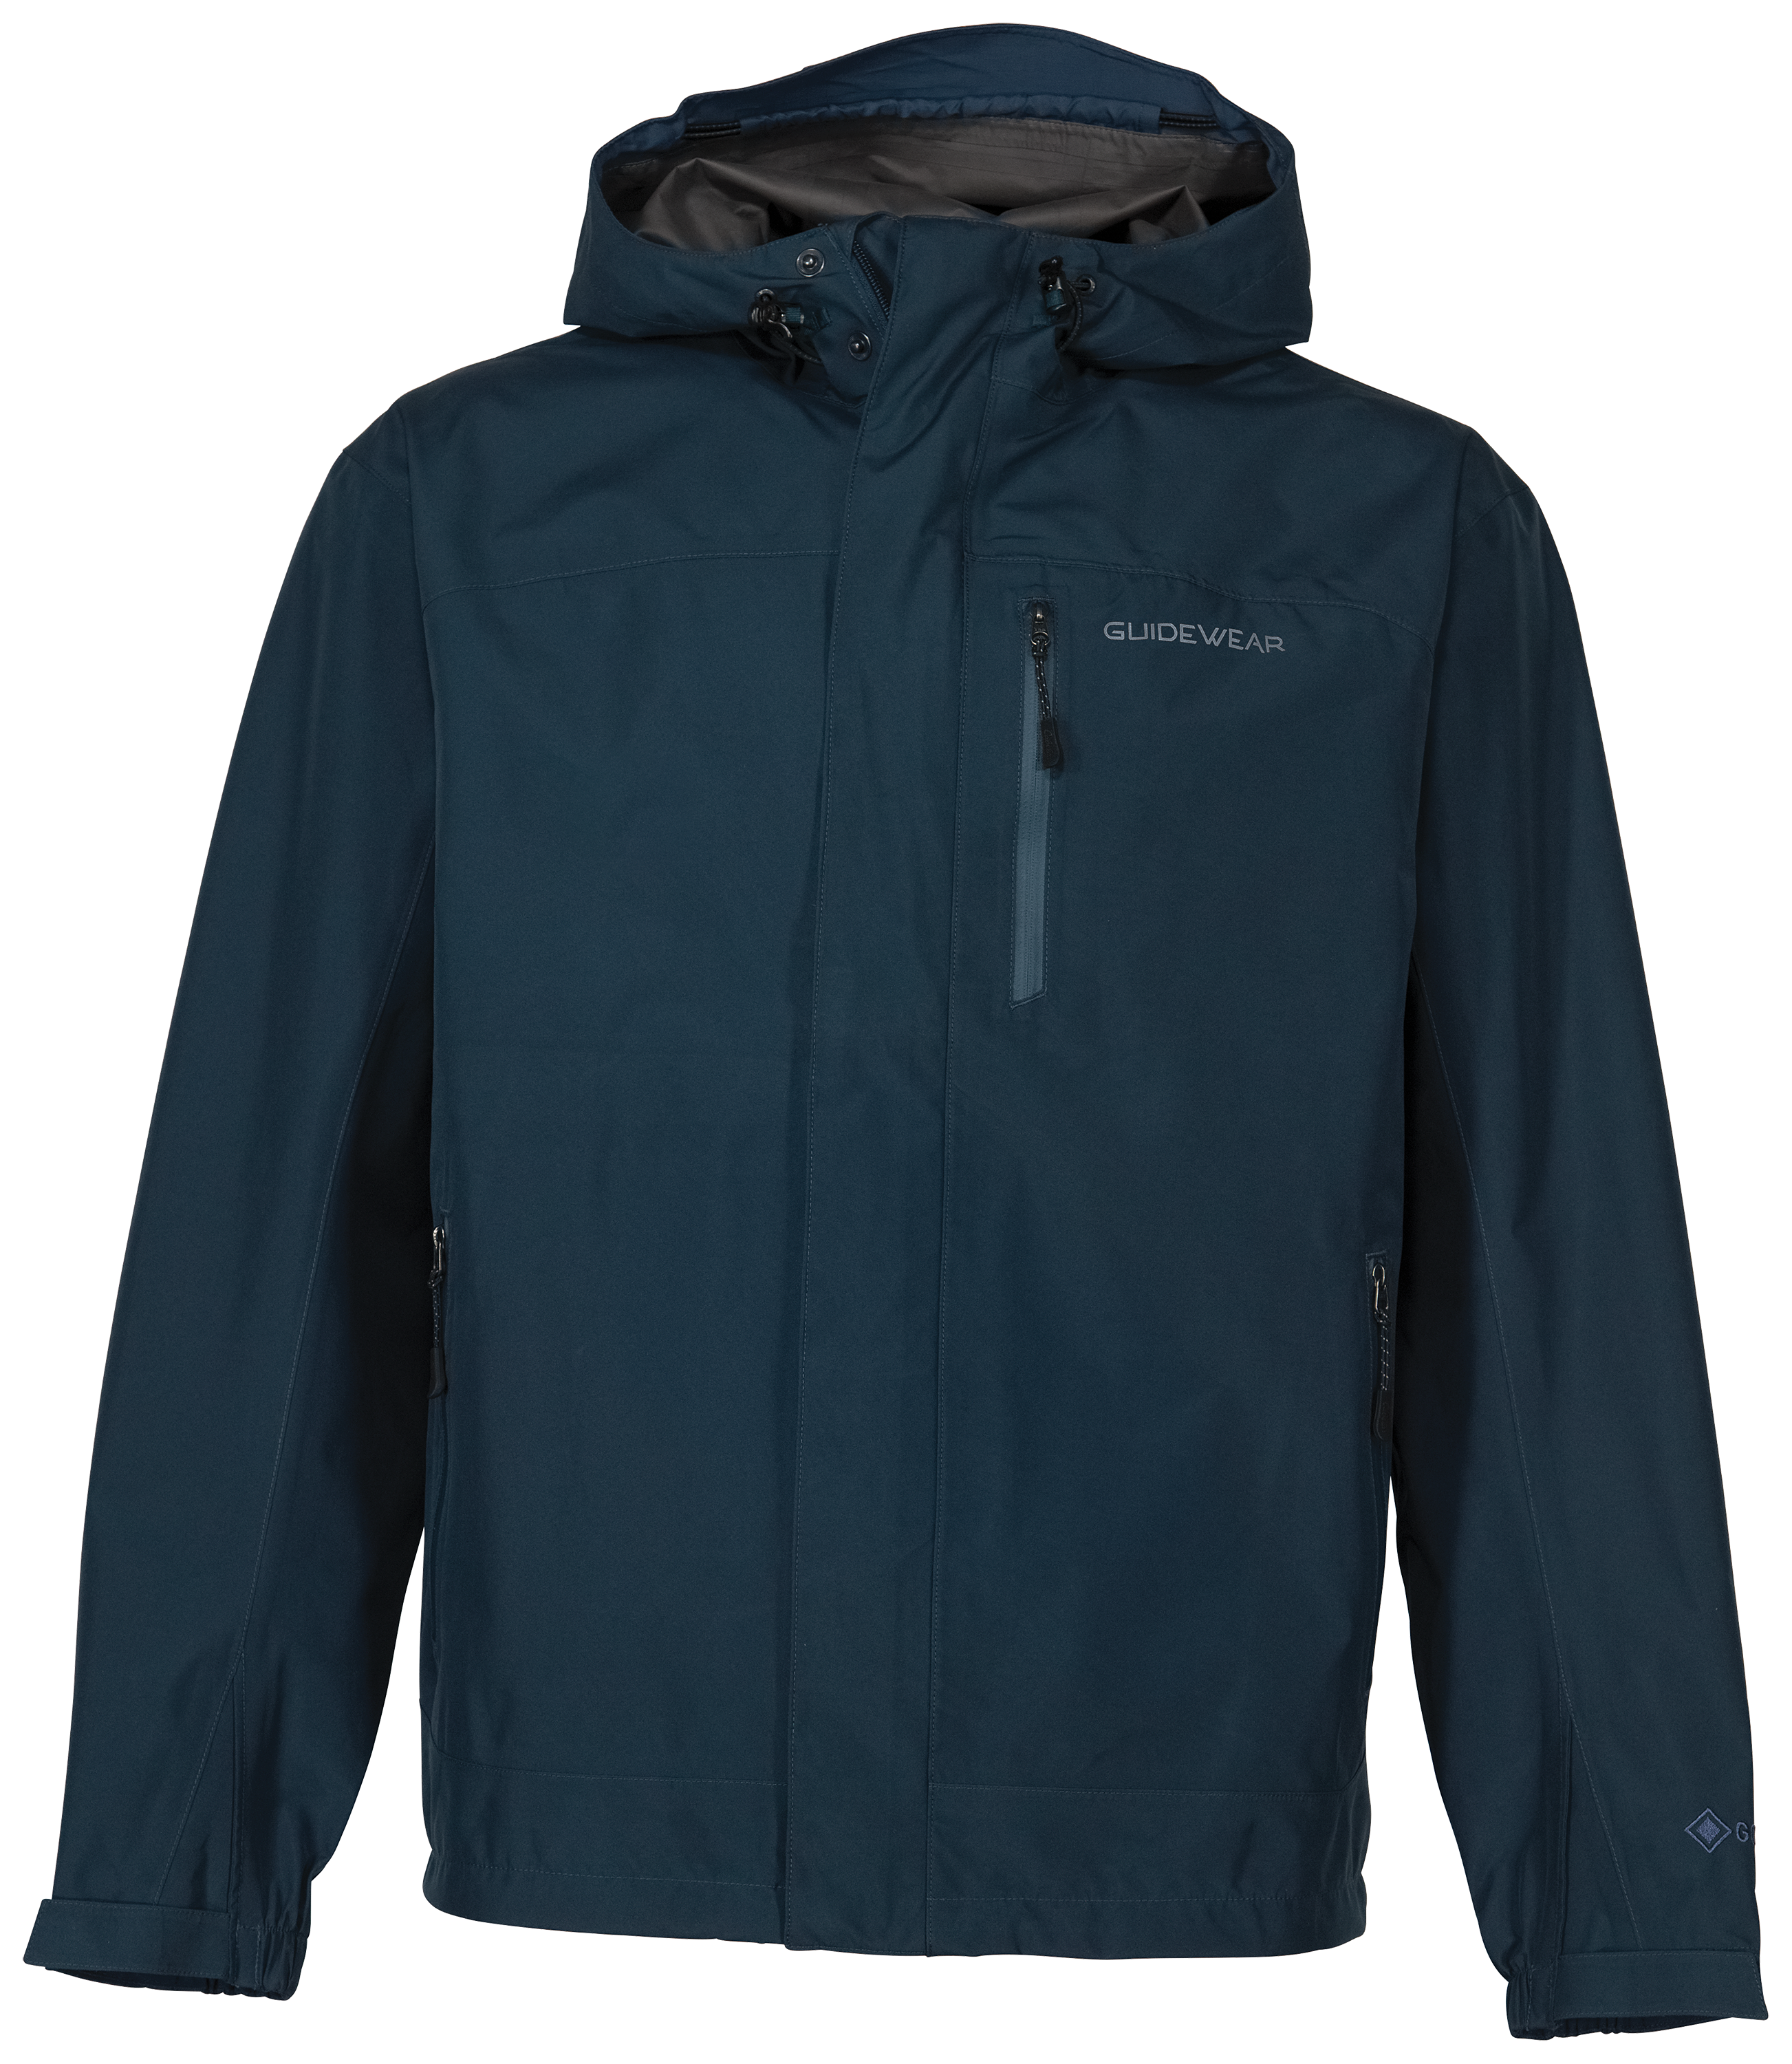 Johnny Morris Bass Pro Shops Guidewear Rainy River Jacket with GORE-TEX PacLite for Men - Shadow Blue - 2XLT